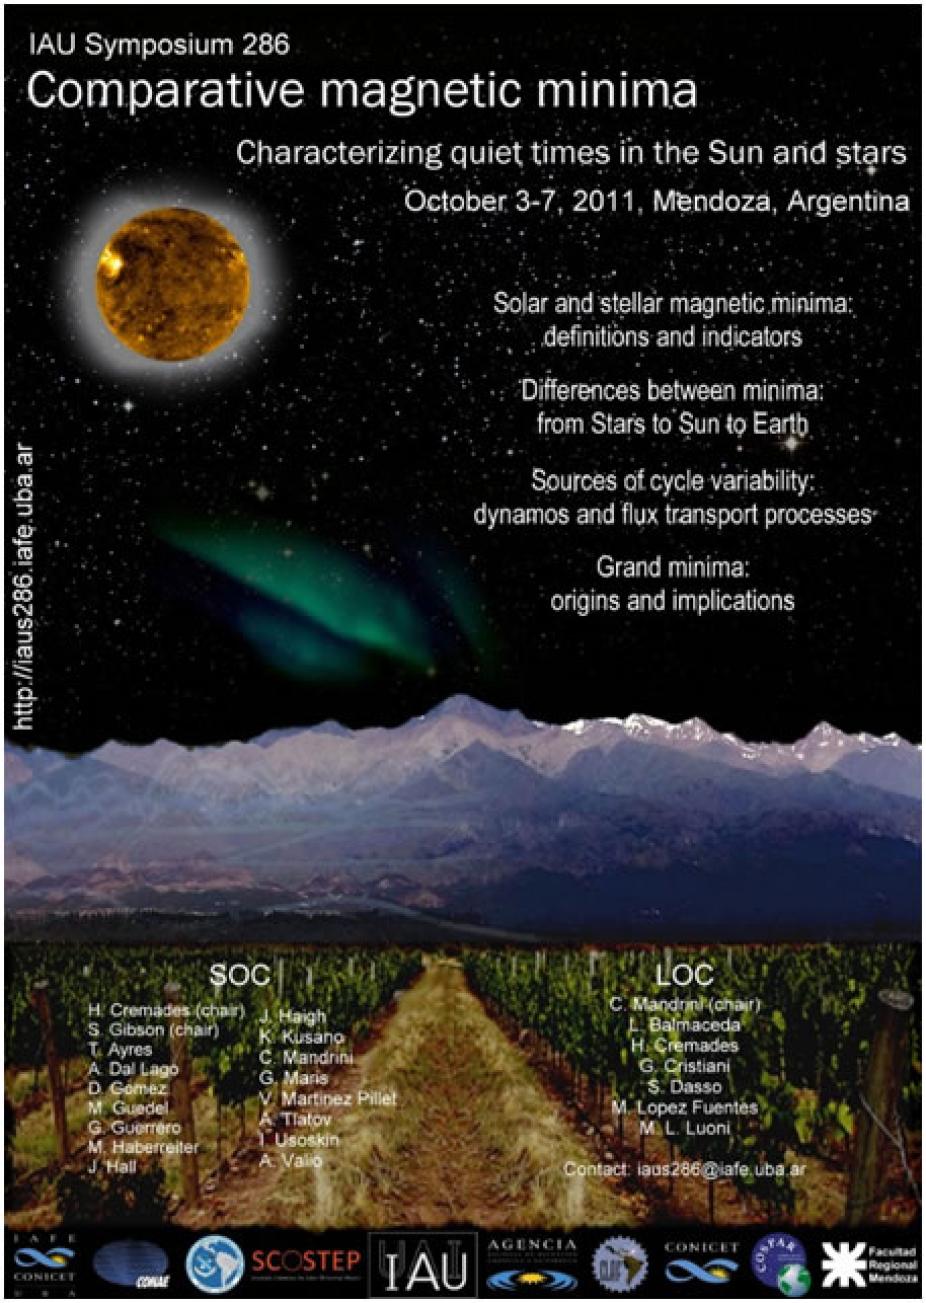 Event poster: The goal of IAU Symposium 286 was to consider solar and stellar minima.